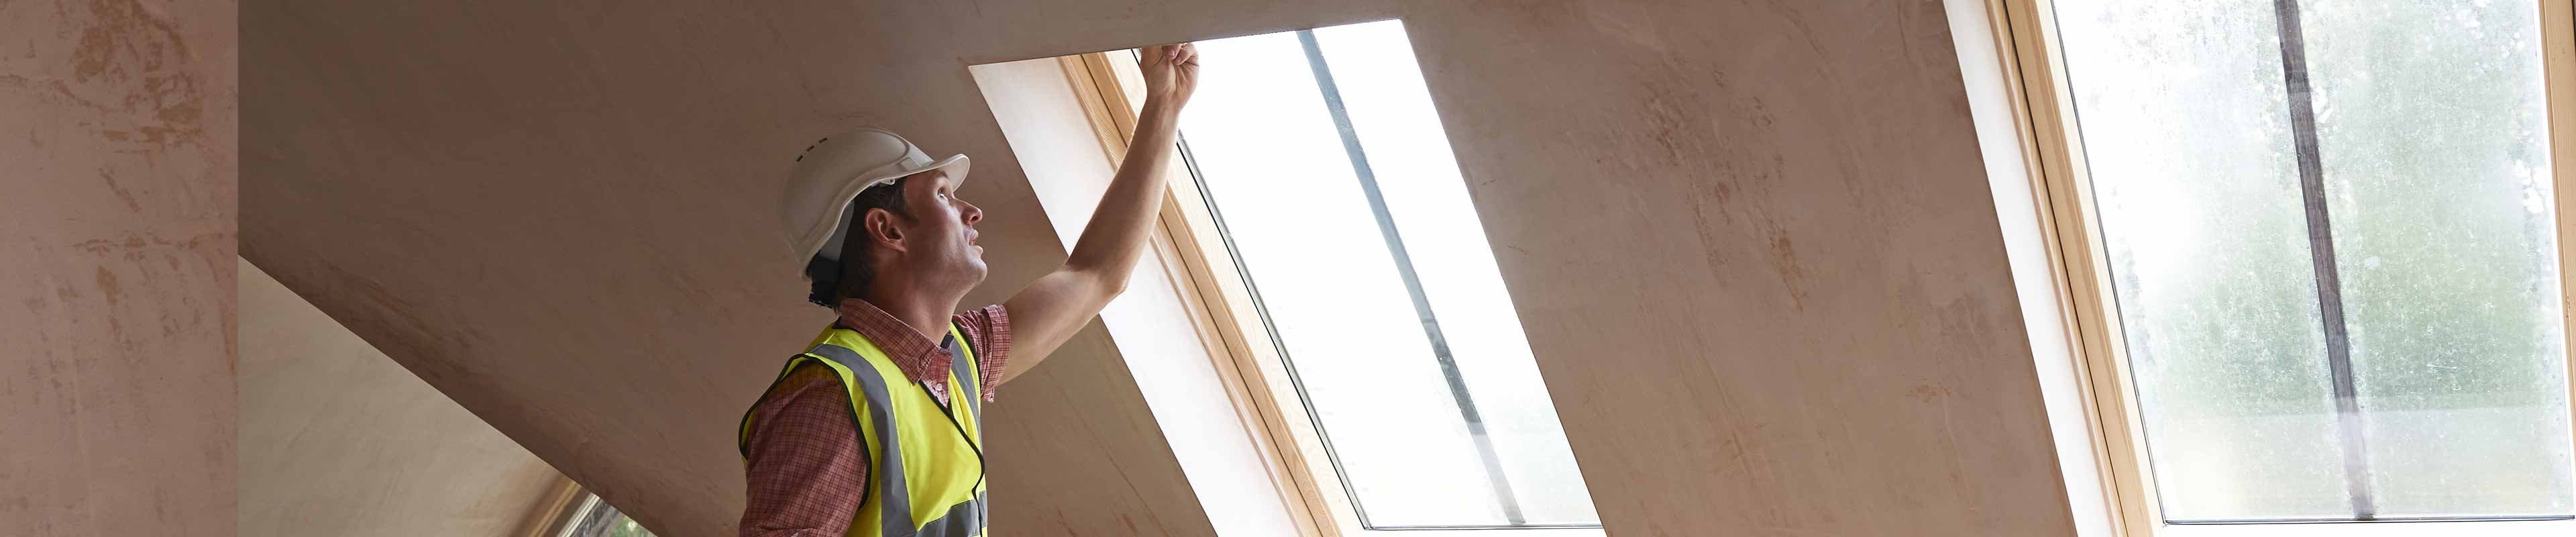 Image of a home inspector checking out a skylight window.